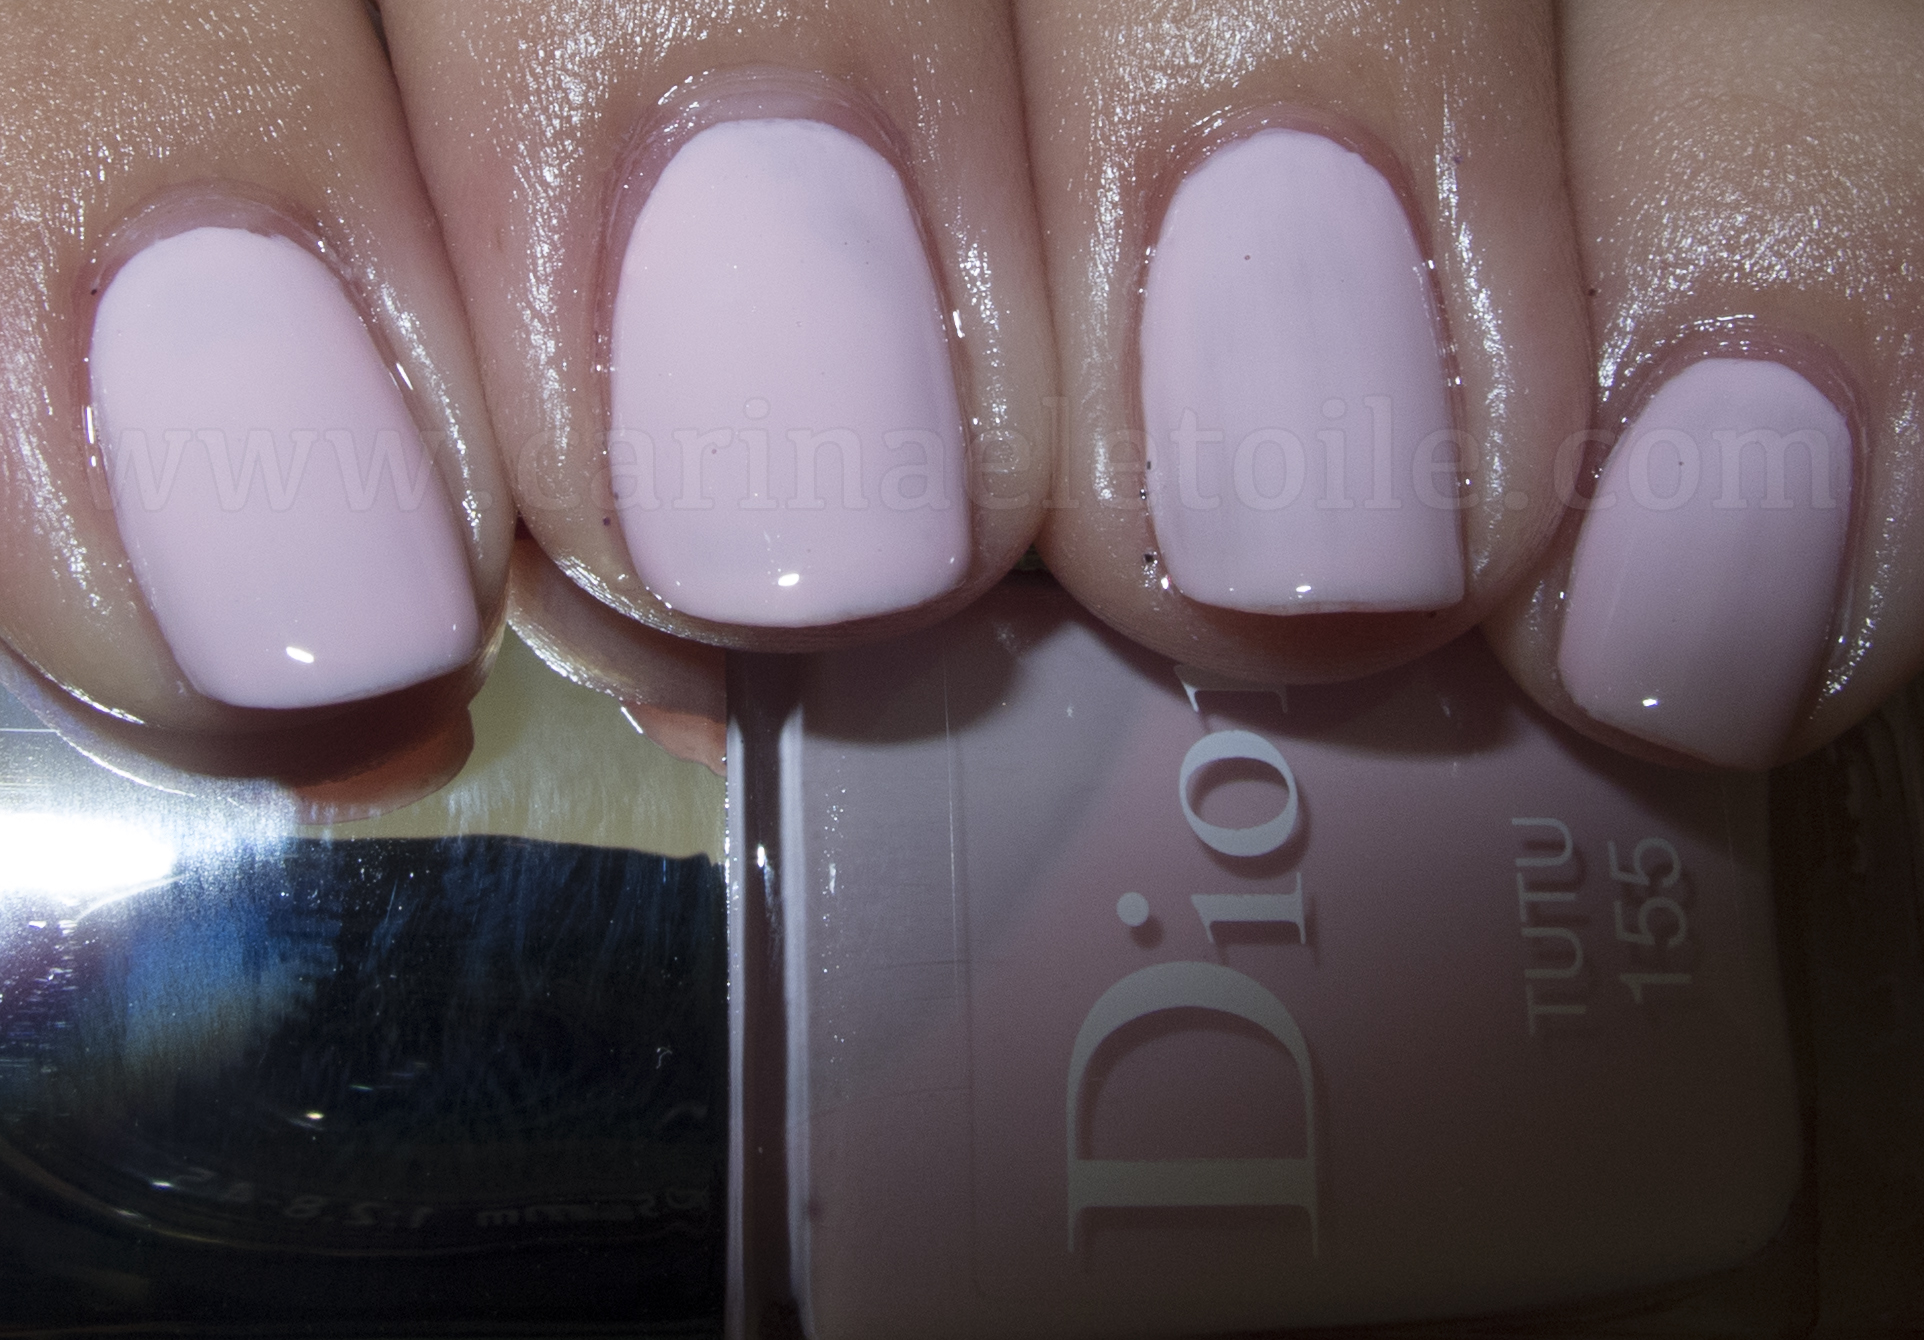 Dior Cherie Bow Spring 2013 Nail Lacquer - Swatches & Review